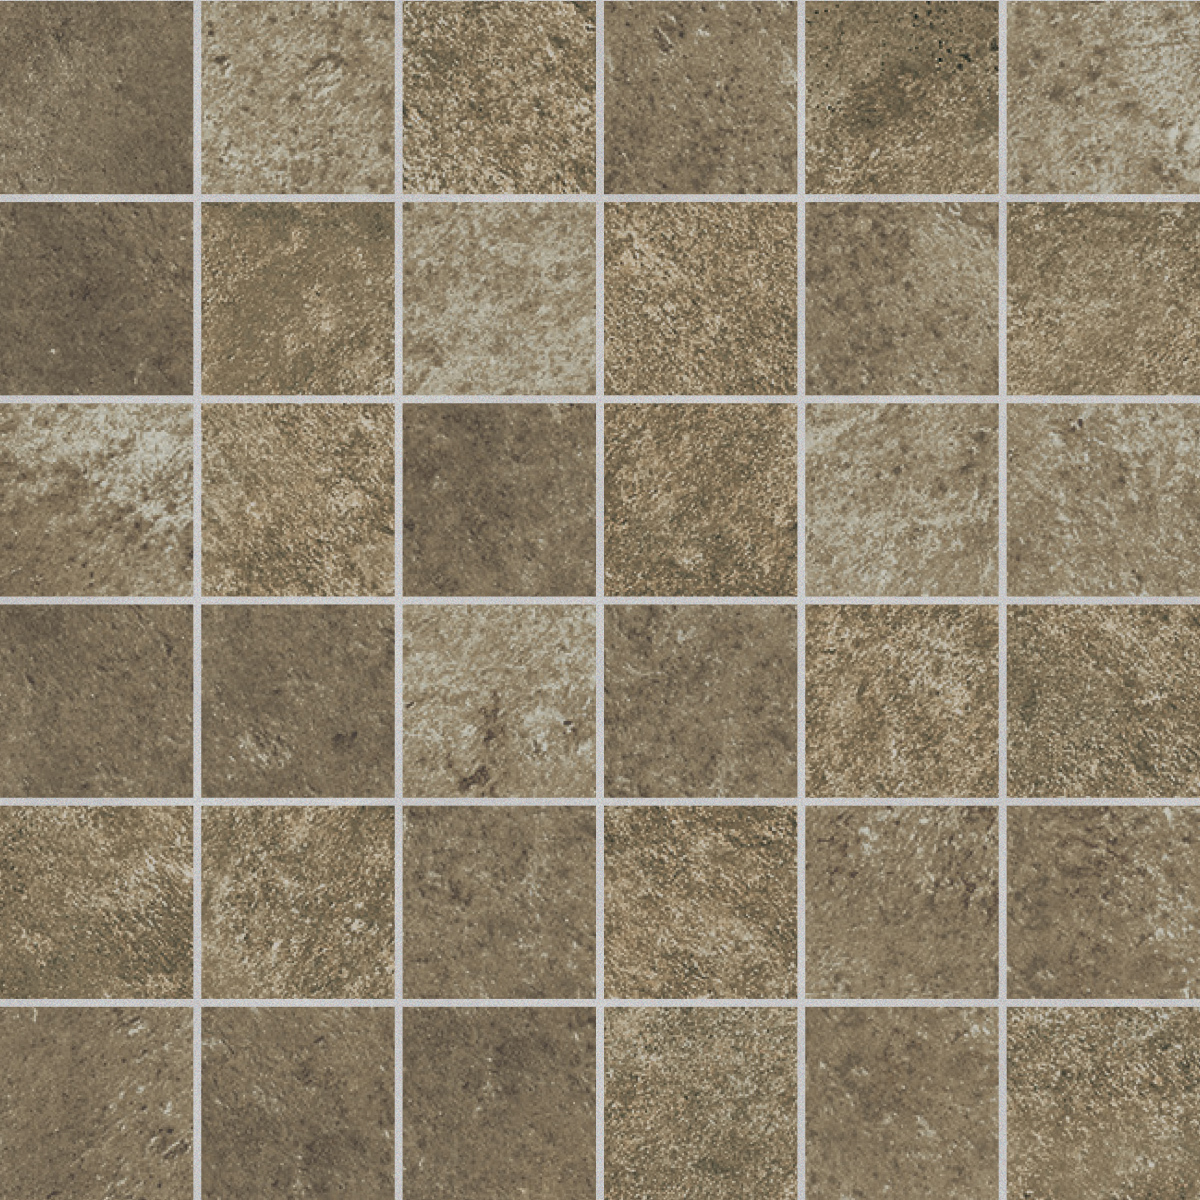 Novabell Overland Tabacco Naturale Mosaic 5x5 OVD665K 30x30cm